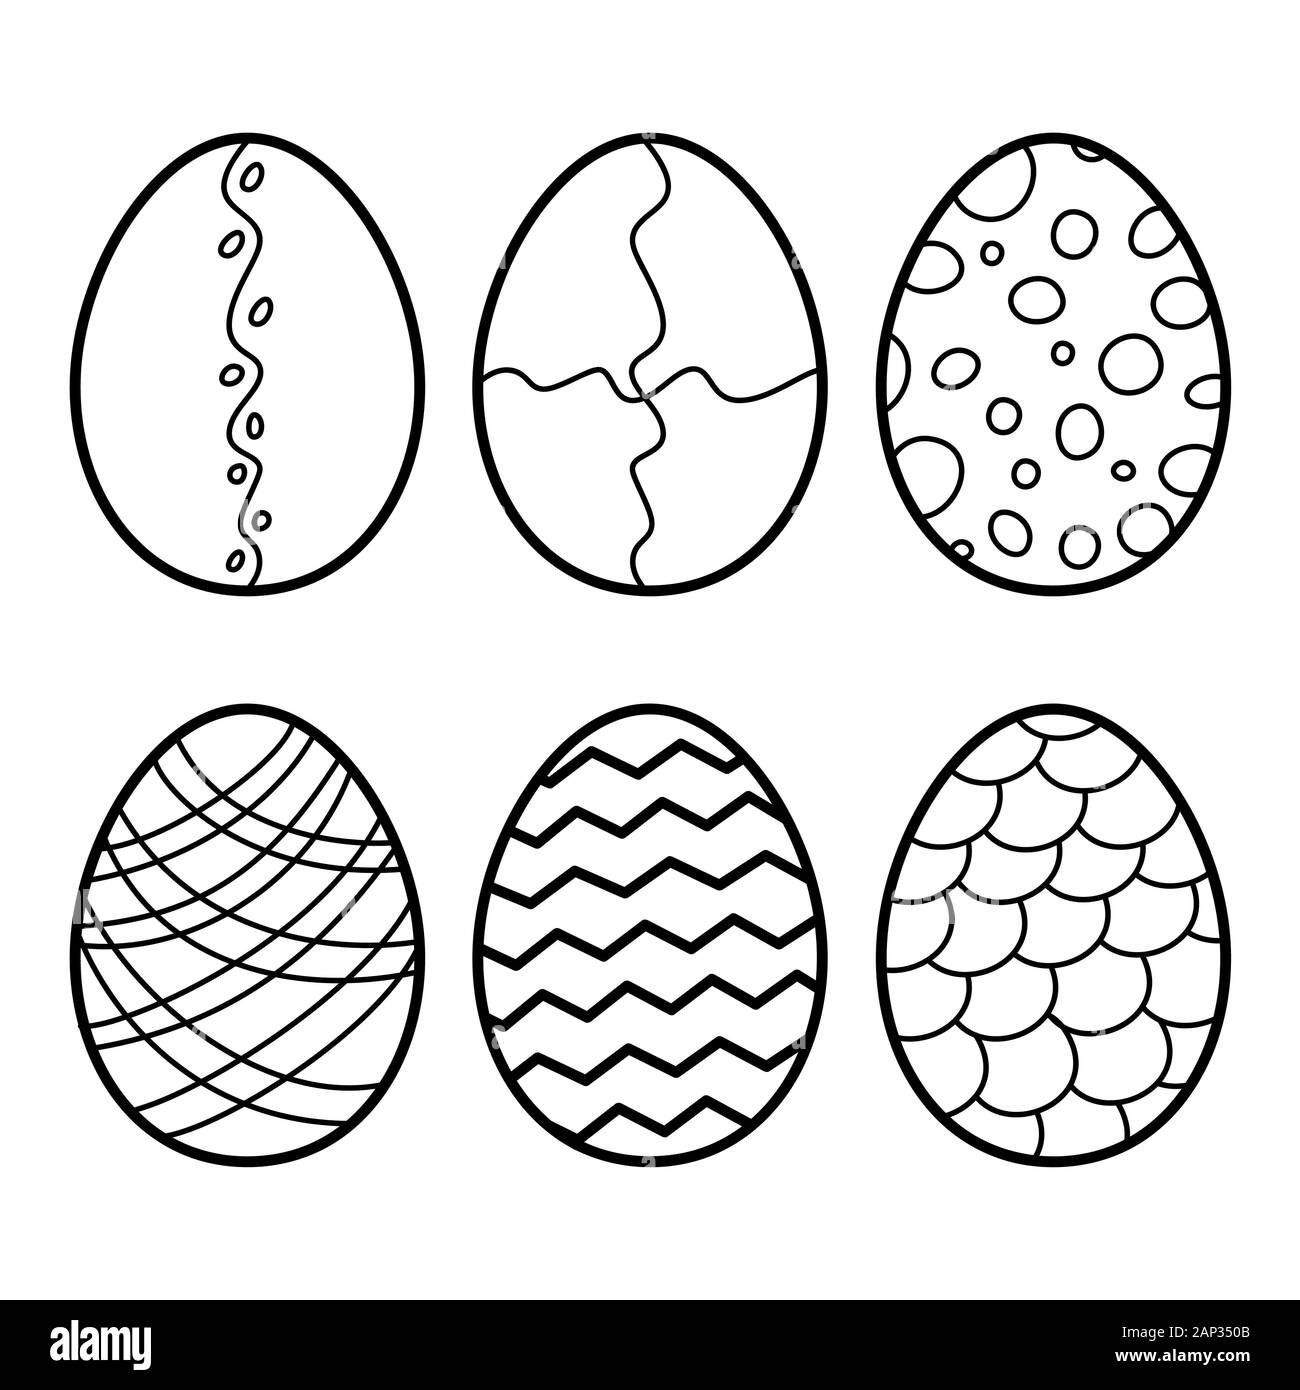 Easter eggs hand drawn decorative egg set elements in vector for coloring book black and white stock vector image art